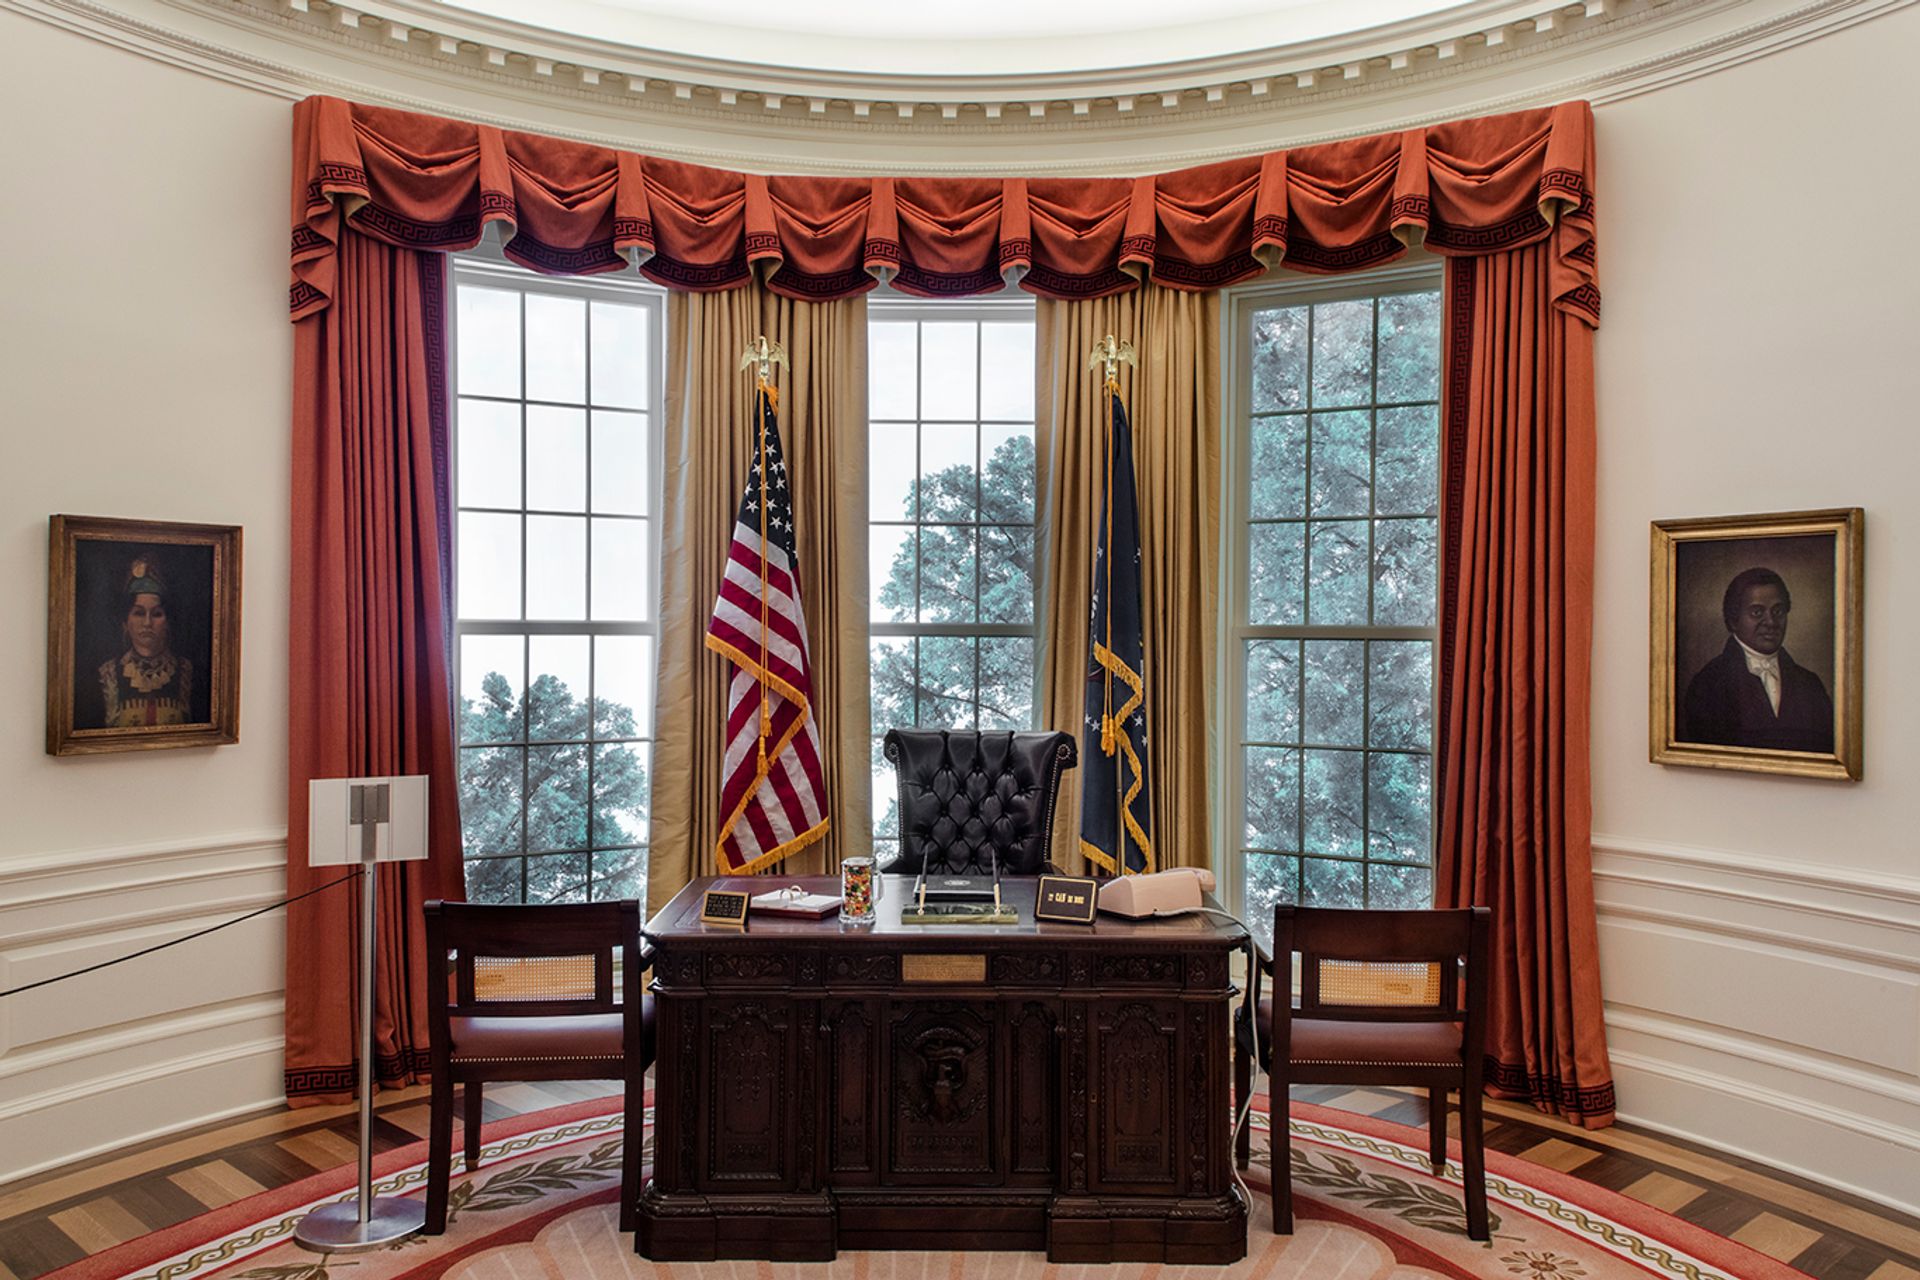 Visitors to the New-York Historical Society can enter a re-creation of the White House Oval Office Glenn Castellano, New-York Historical Society.